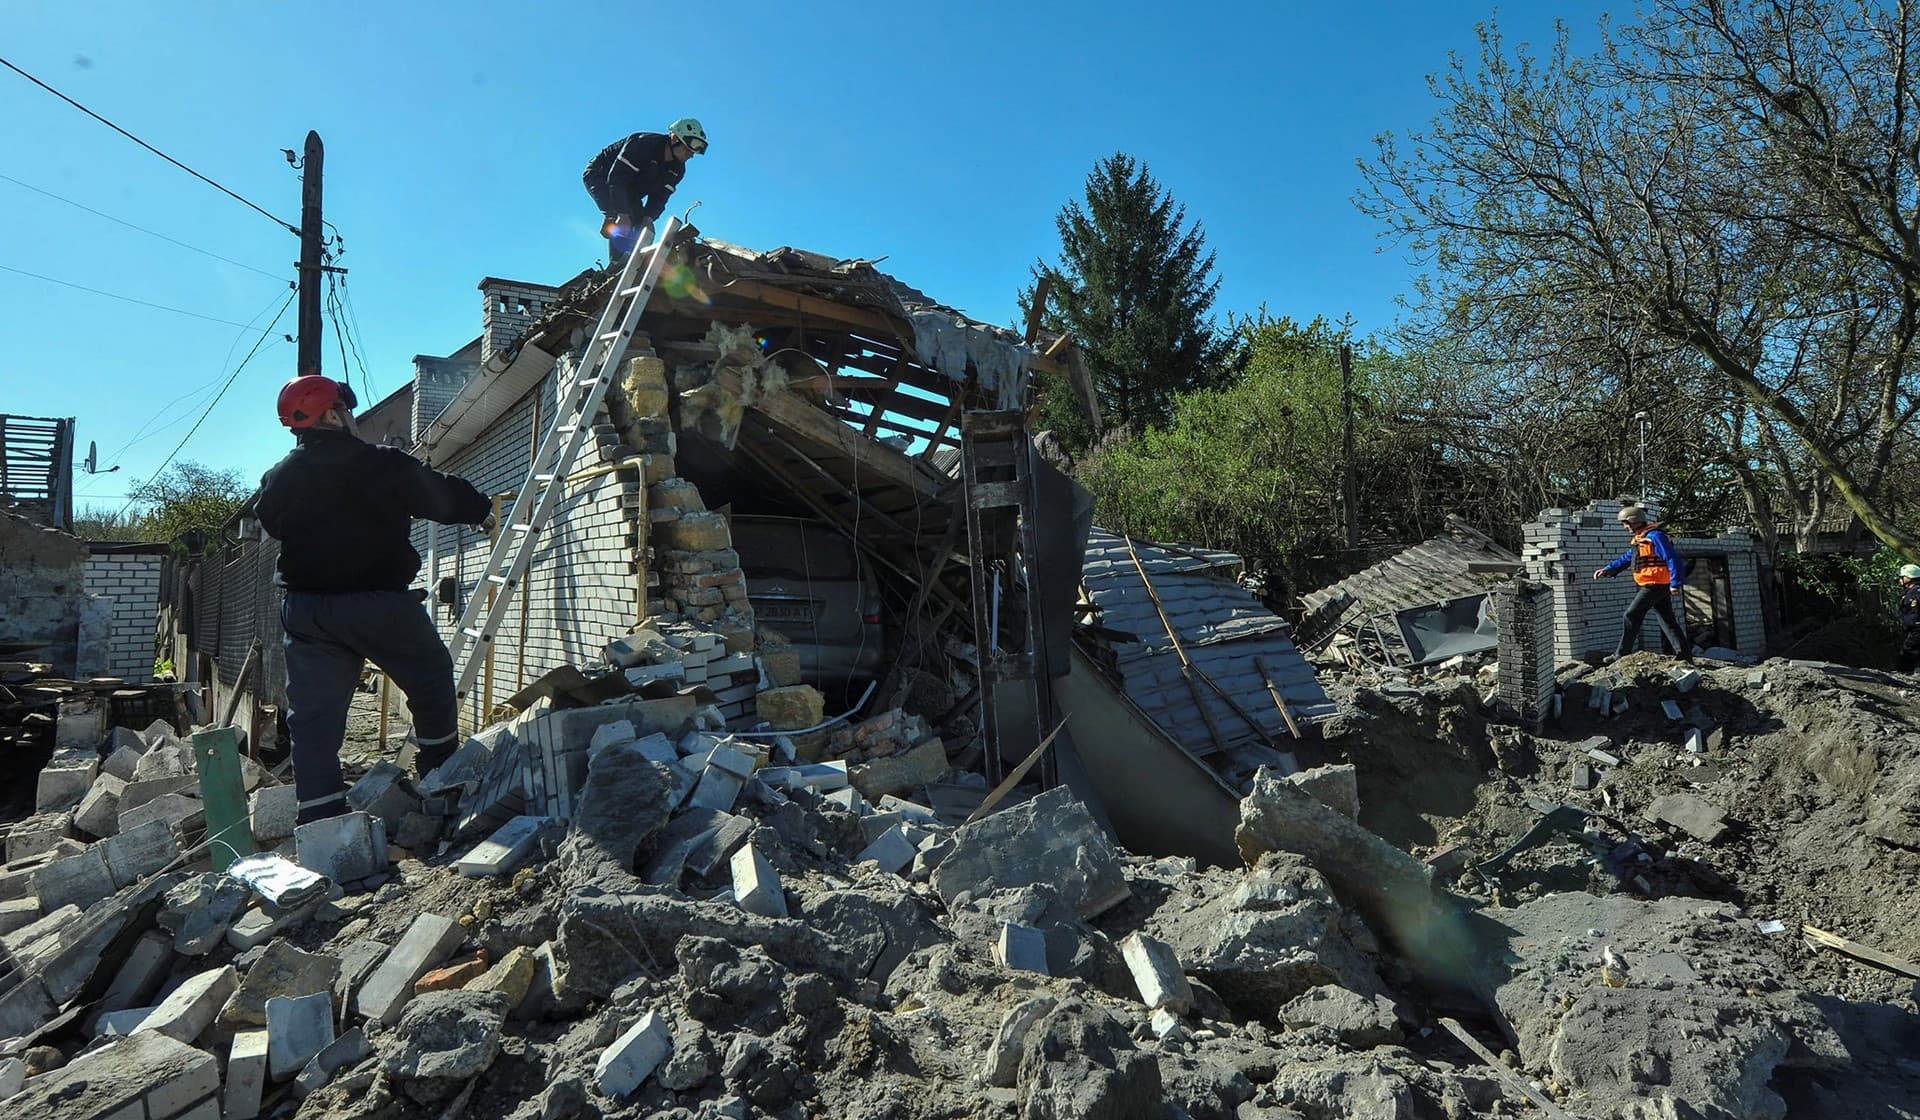 Rescuers work at the site of a residential area heavily damaged by a Russian missile strike in Zaporizhzhia